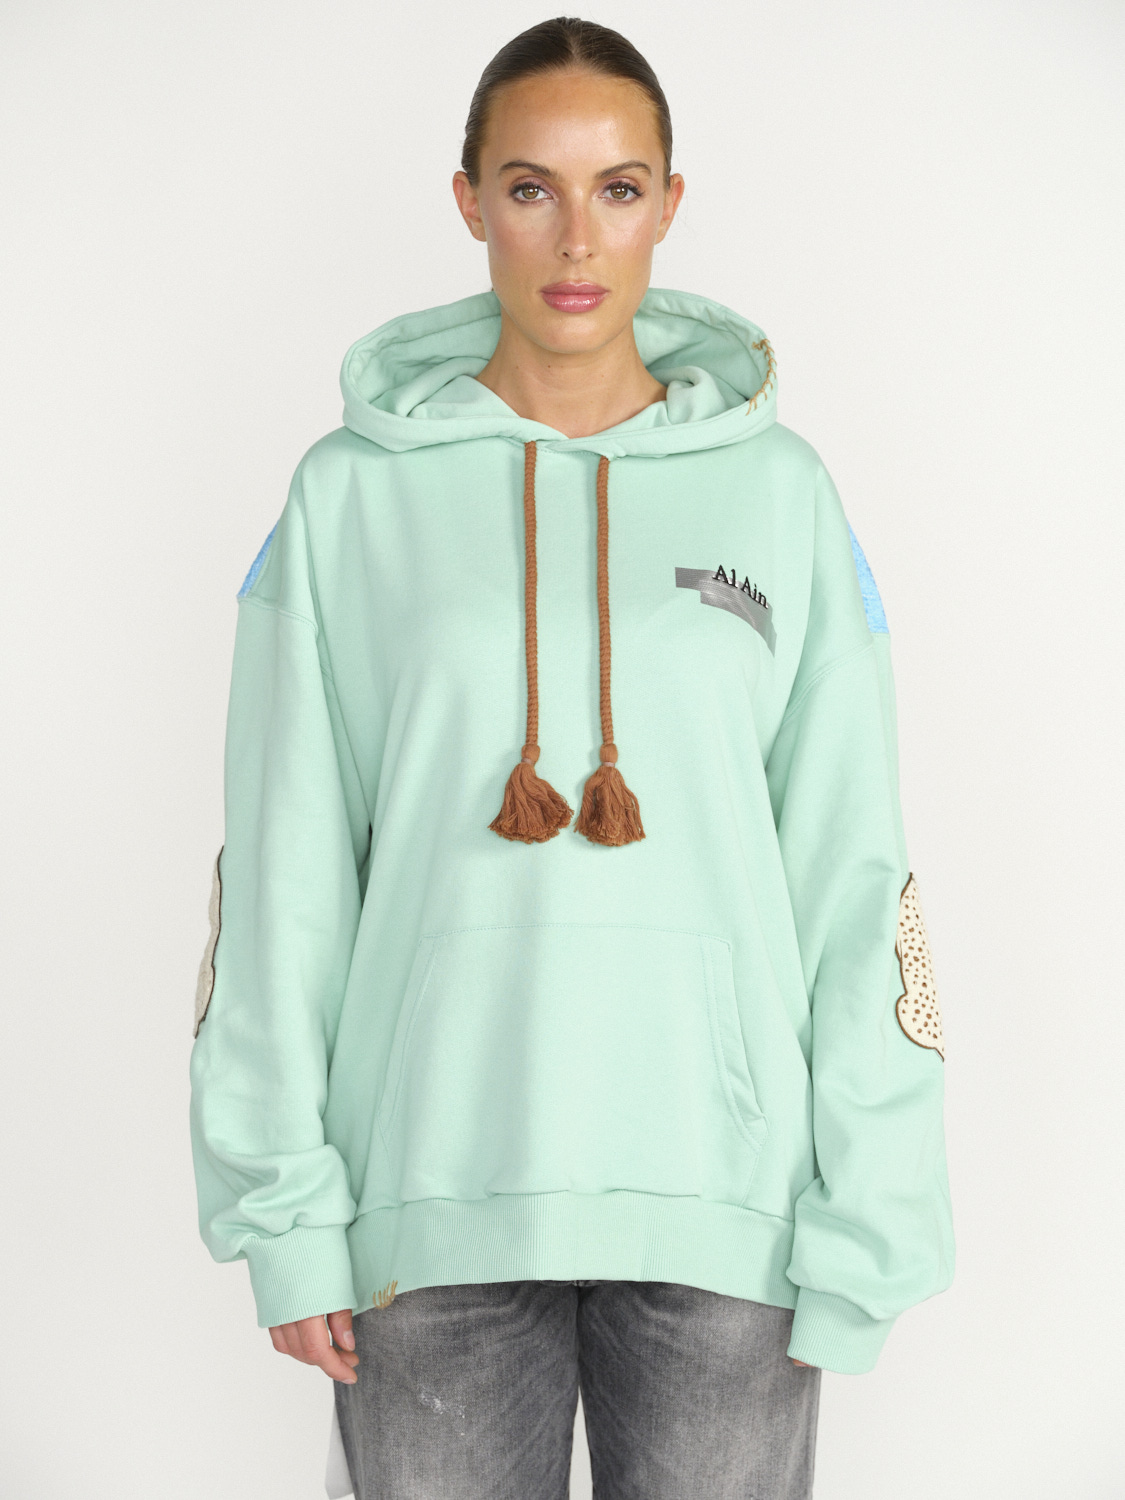 Al Ain Ahox Le Tennis - Oversized hoodie with pattern blue S/M